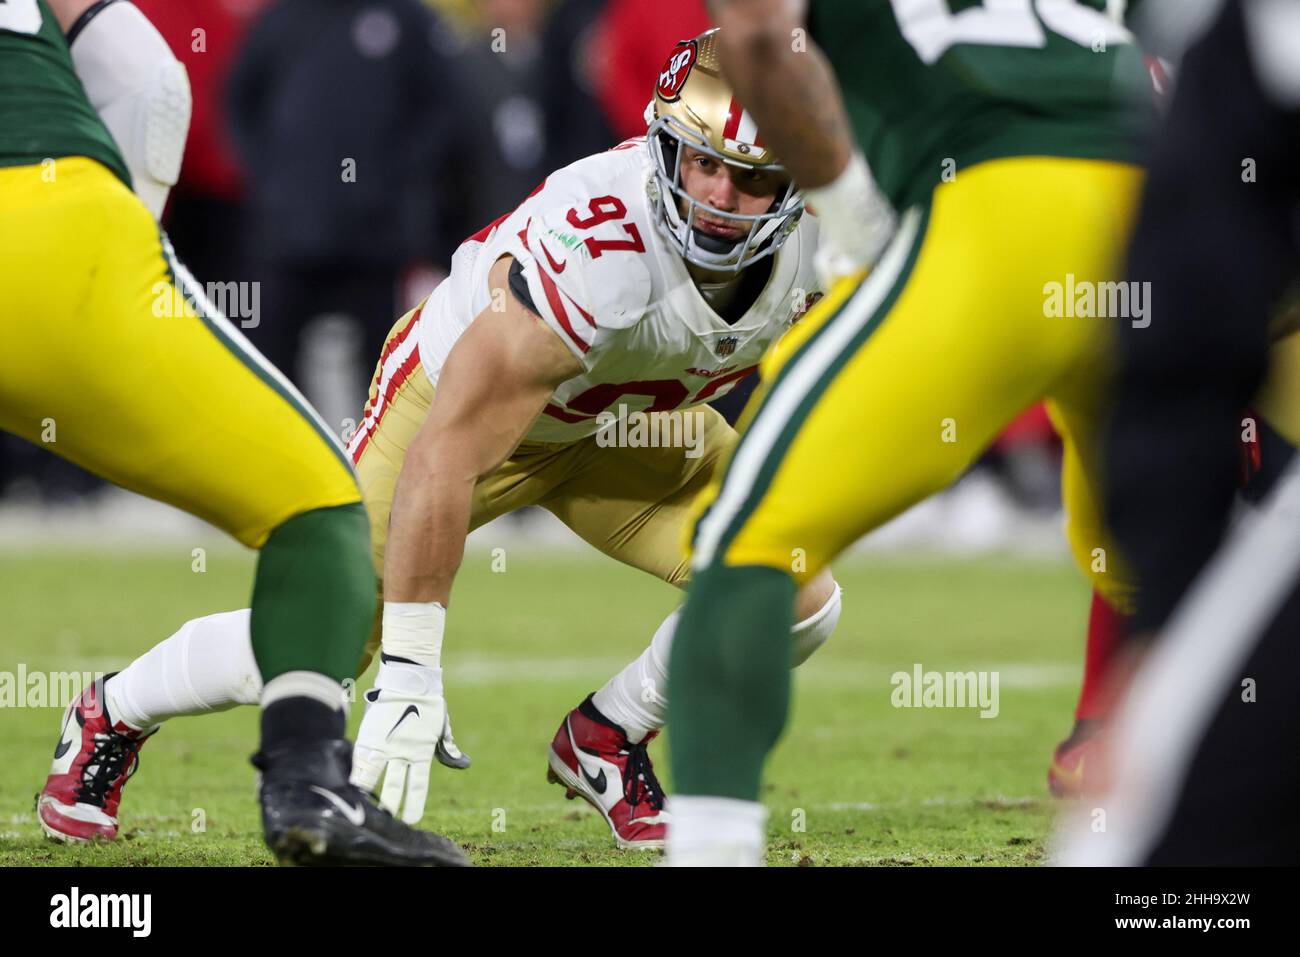 Green Bay, Wisconsin, USA. 22nd Jan, 2022. San Francisco 49ers defensive  end Nick Bosa (97) Air Jordan 1 cleats in the 'Chicago' color way during  the NFL divisional playoff football game between